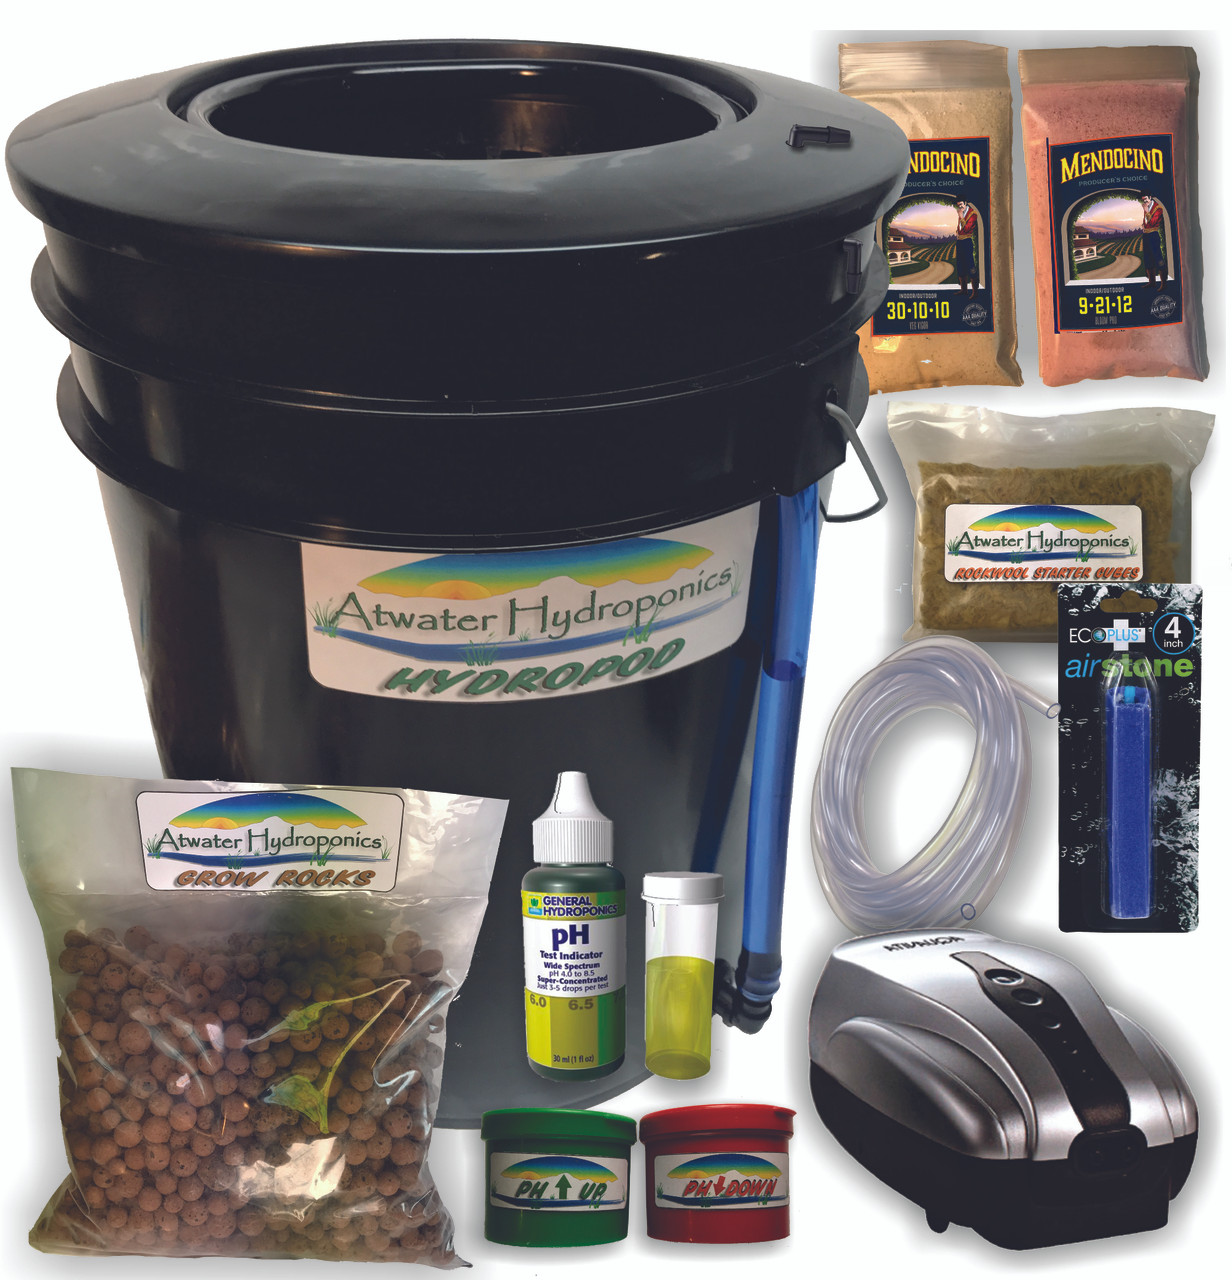 HydroPod - Complete System - Including Sample Nutrients & pH Kit